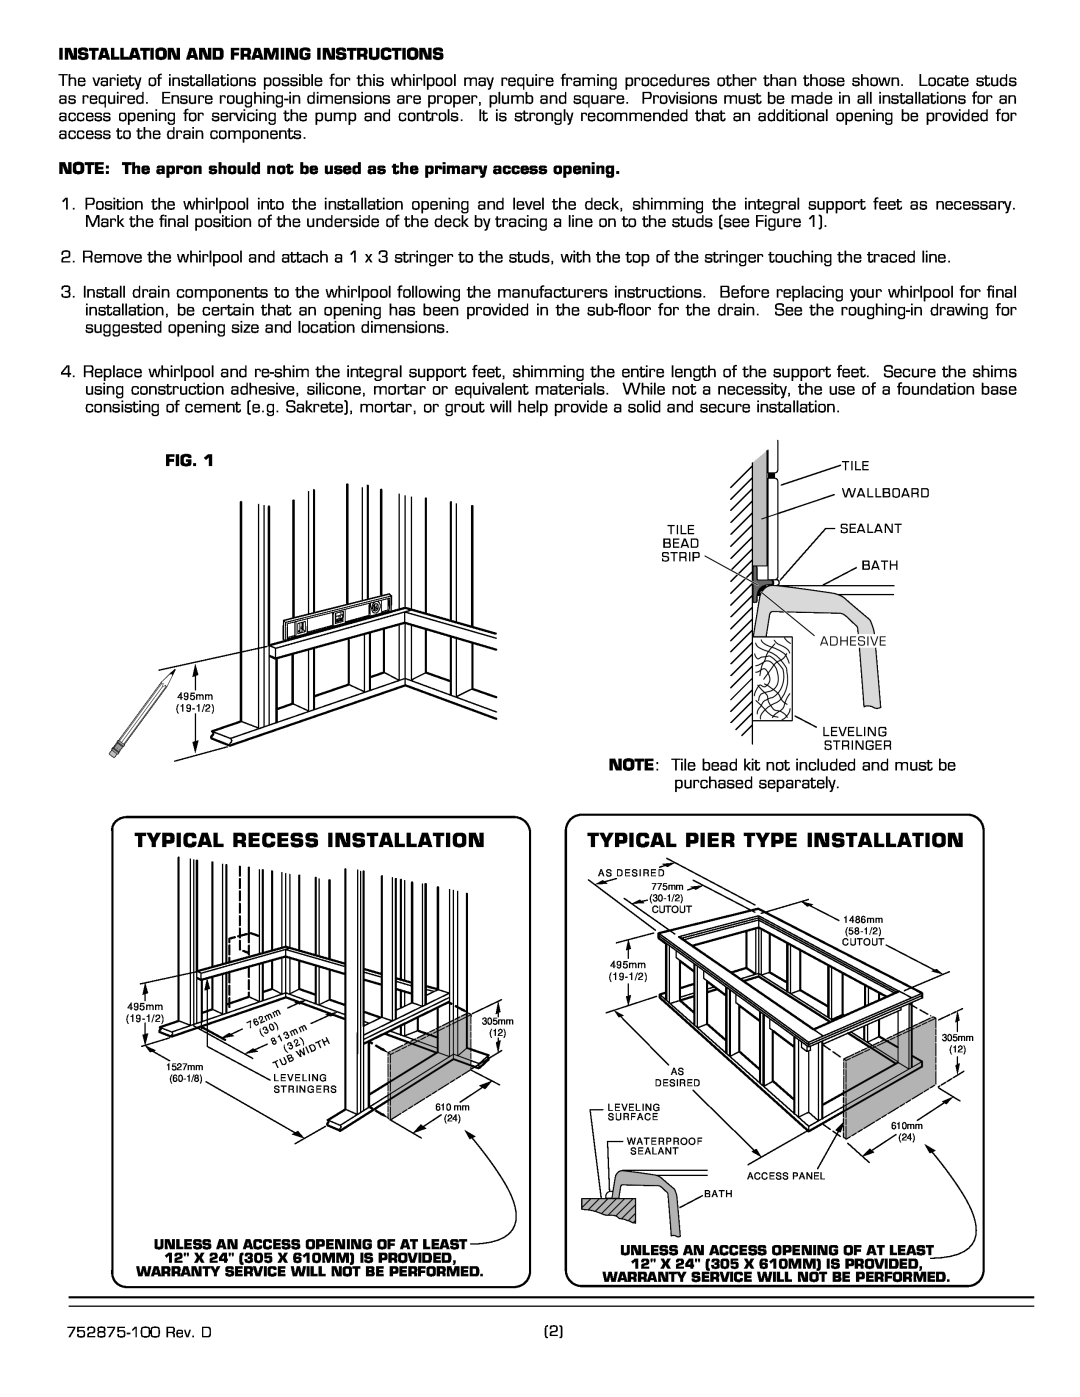 American Standard 2425E SERIES installation instructions Typical Recess Installation, Typical Pier Type Installation 